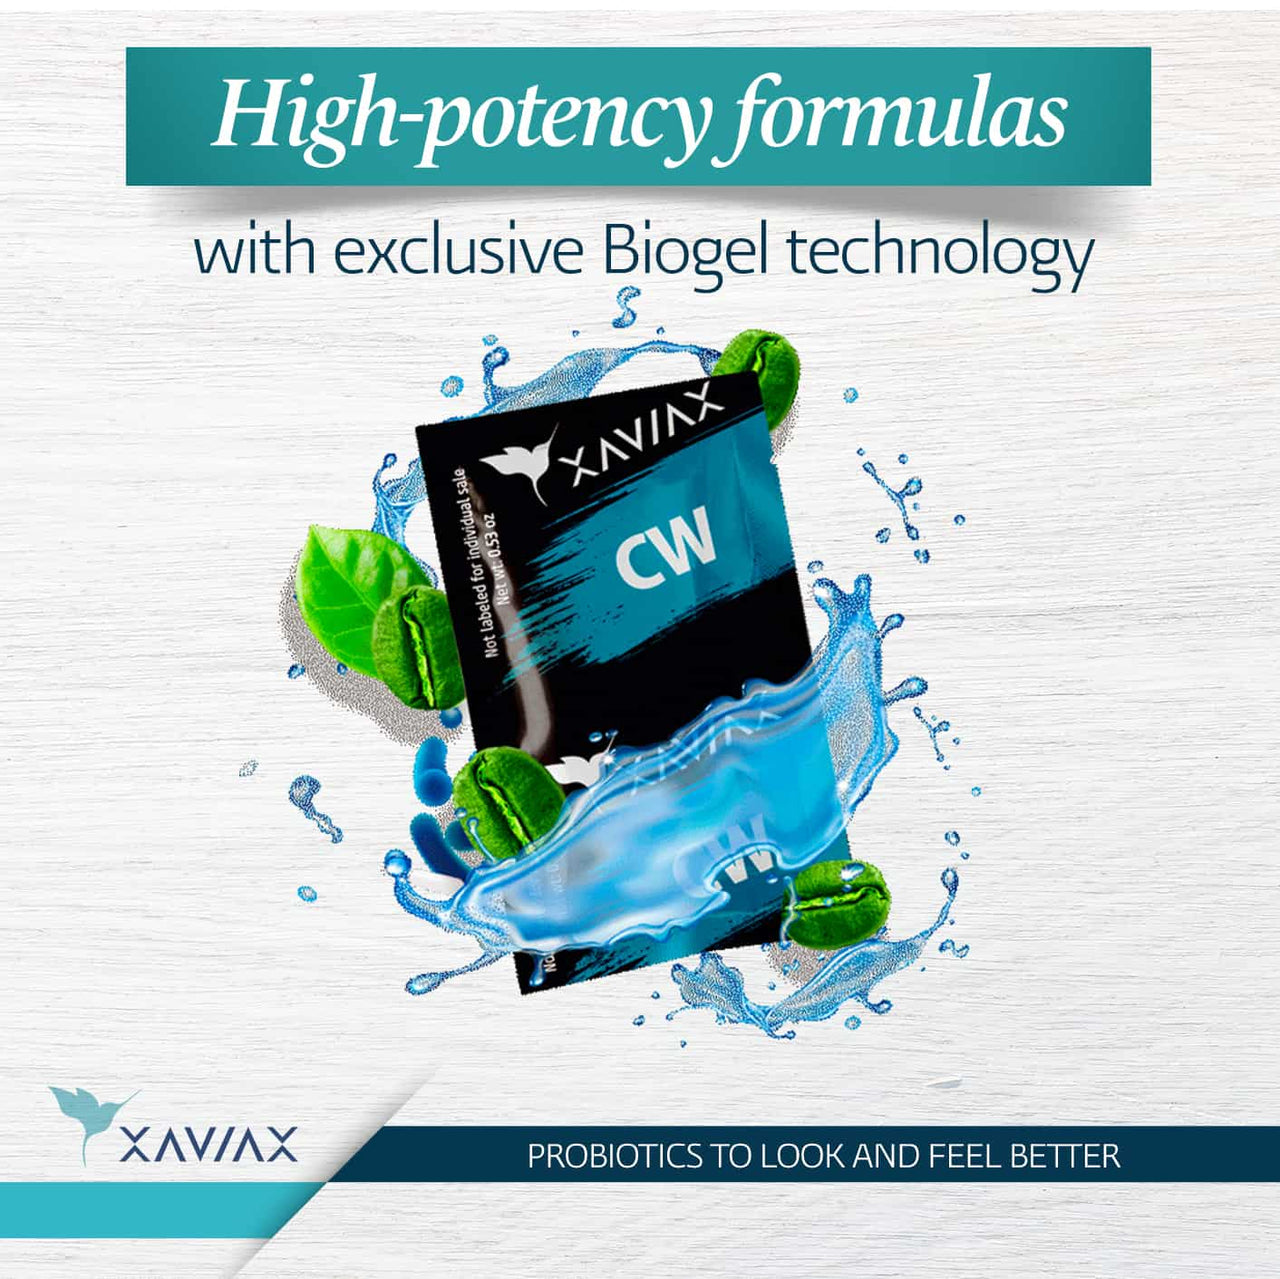 cw- highpotency formulas with exclusive biogel technology